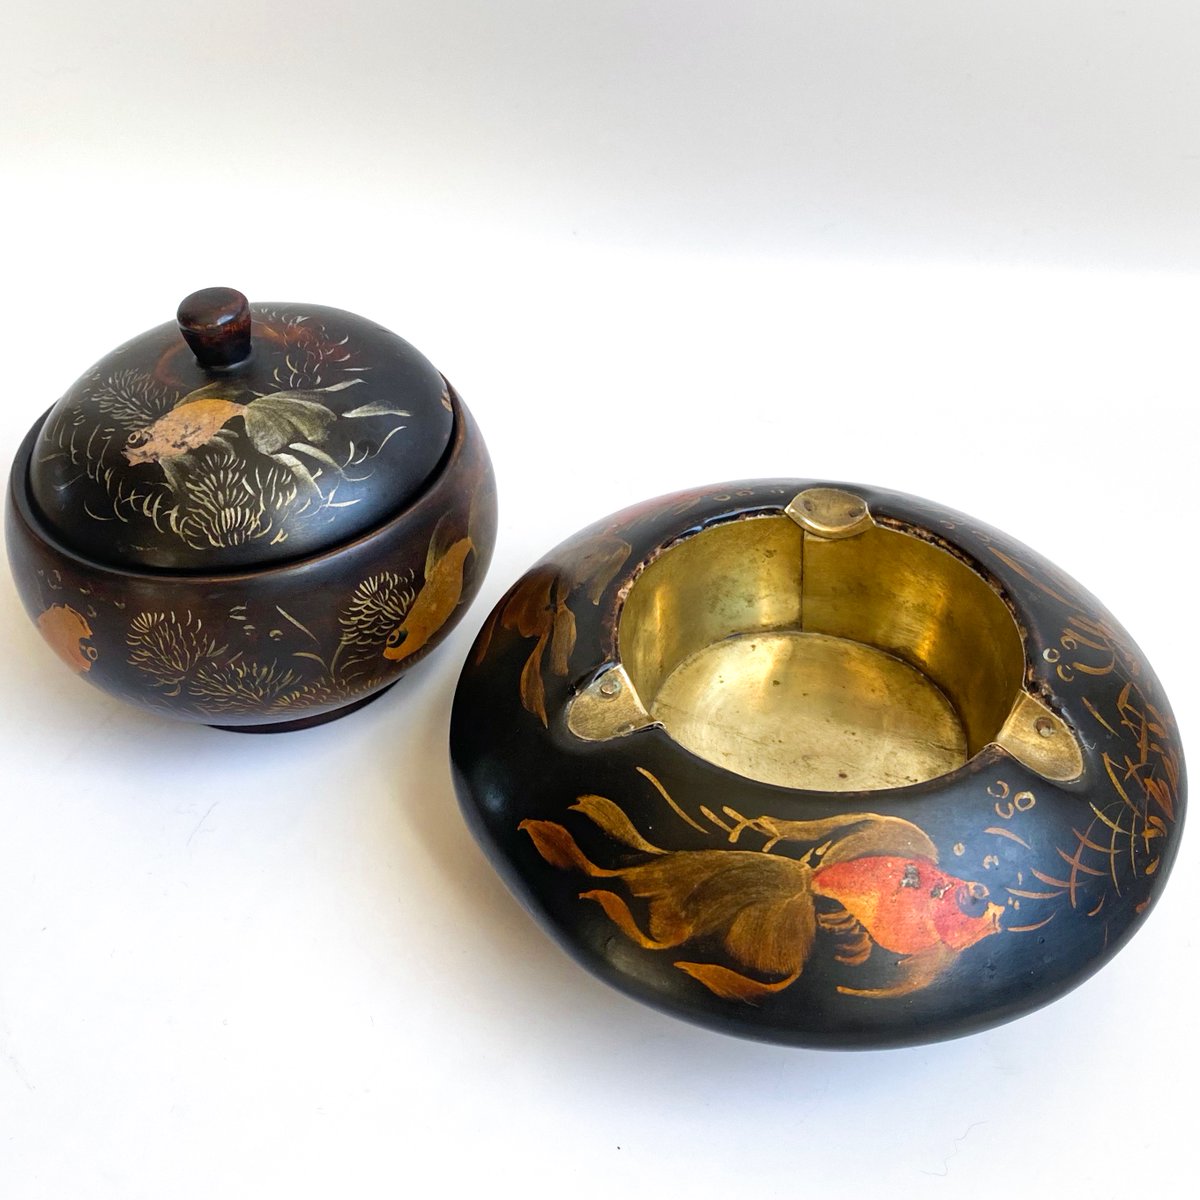 These are interesting - Japanese lacquered wood brass-lined ashtray and lidded trinket box, with hand-painted goldfish designs, dating from the 1940s. Diameter of the ashtray is 13cm.
priddeythings.etsy.com/listing/166870…
#vintageshowandsell #vintage #lacquerware